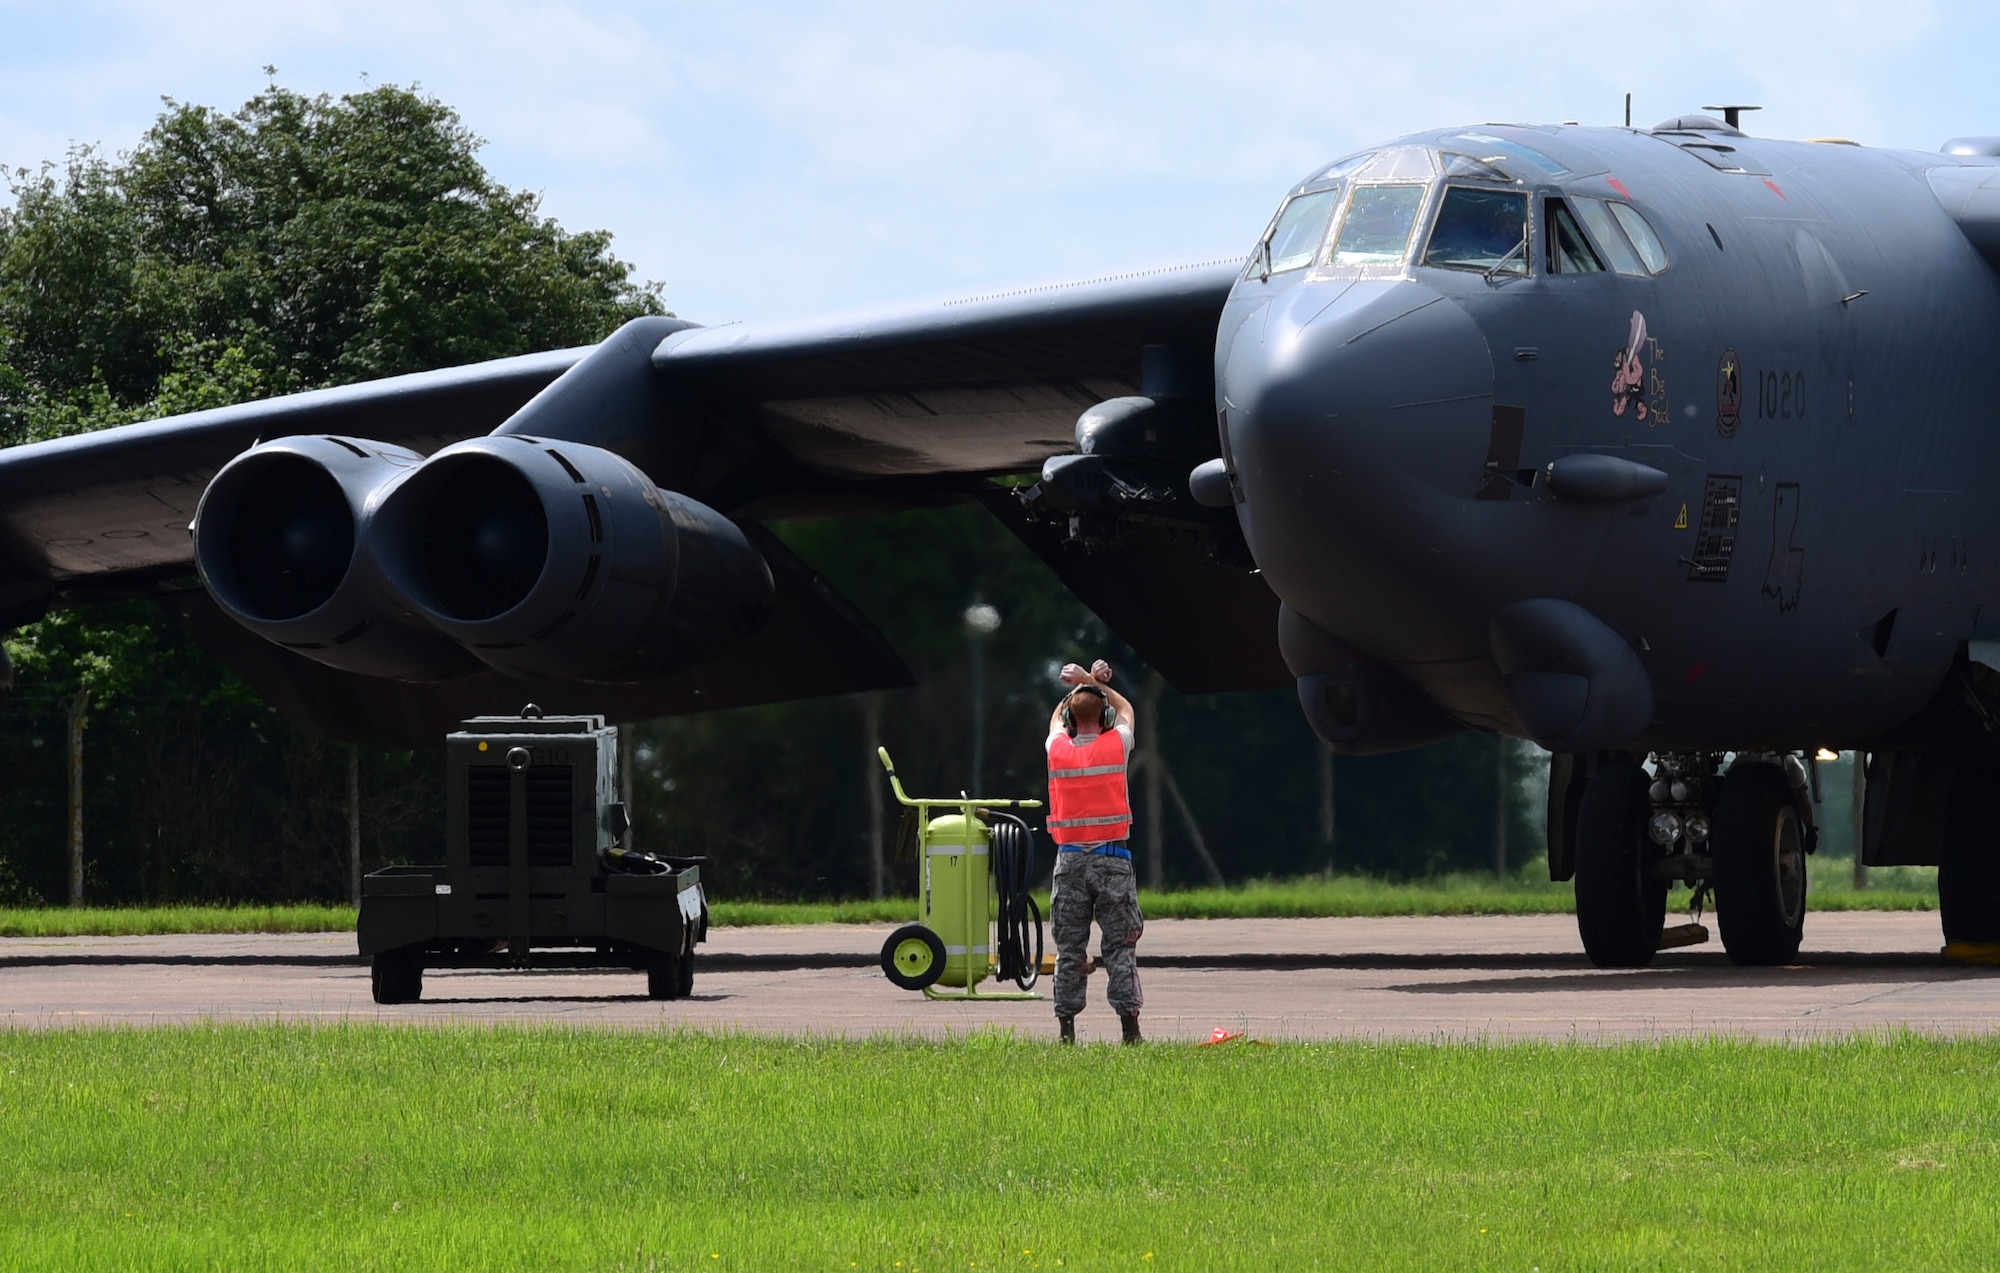 U.S. Air Force Senior Airman Calvin Kunkel, 2nd Aircraft Maintenance Squadron assistant dedicated crew chief, marshals a B-52H Stratofortress from Barksdale Air Force Base, La., at RAF Fairford, U.K., June 1, 2017. Approximately 800 Striker Airmen from Air Force Global Strike Command are participating in joint and combined exercises in the European theatre with 14 allied and partner nations enhancing the Air Force’s interoperability and resiliency with allied nations. (U.S. Air Force photo by Airman 1st Class Randahl J. Jenson)